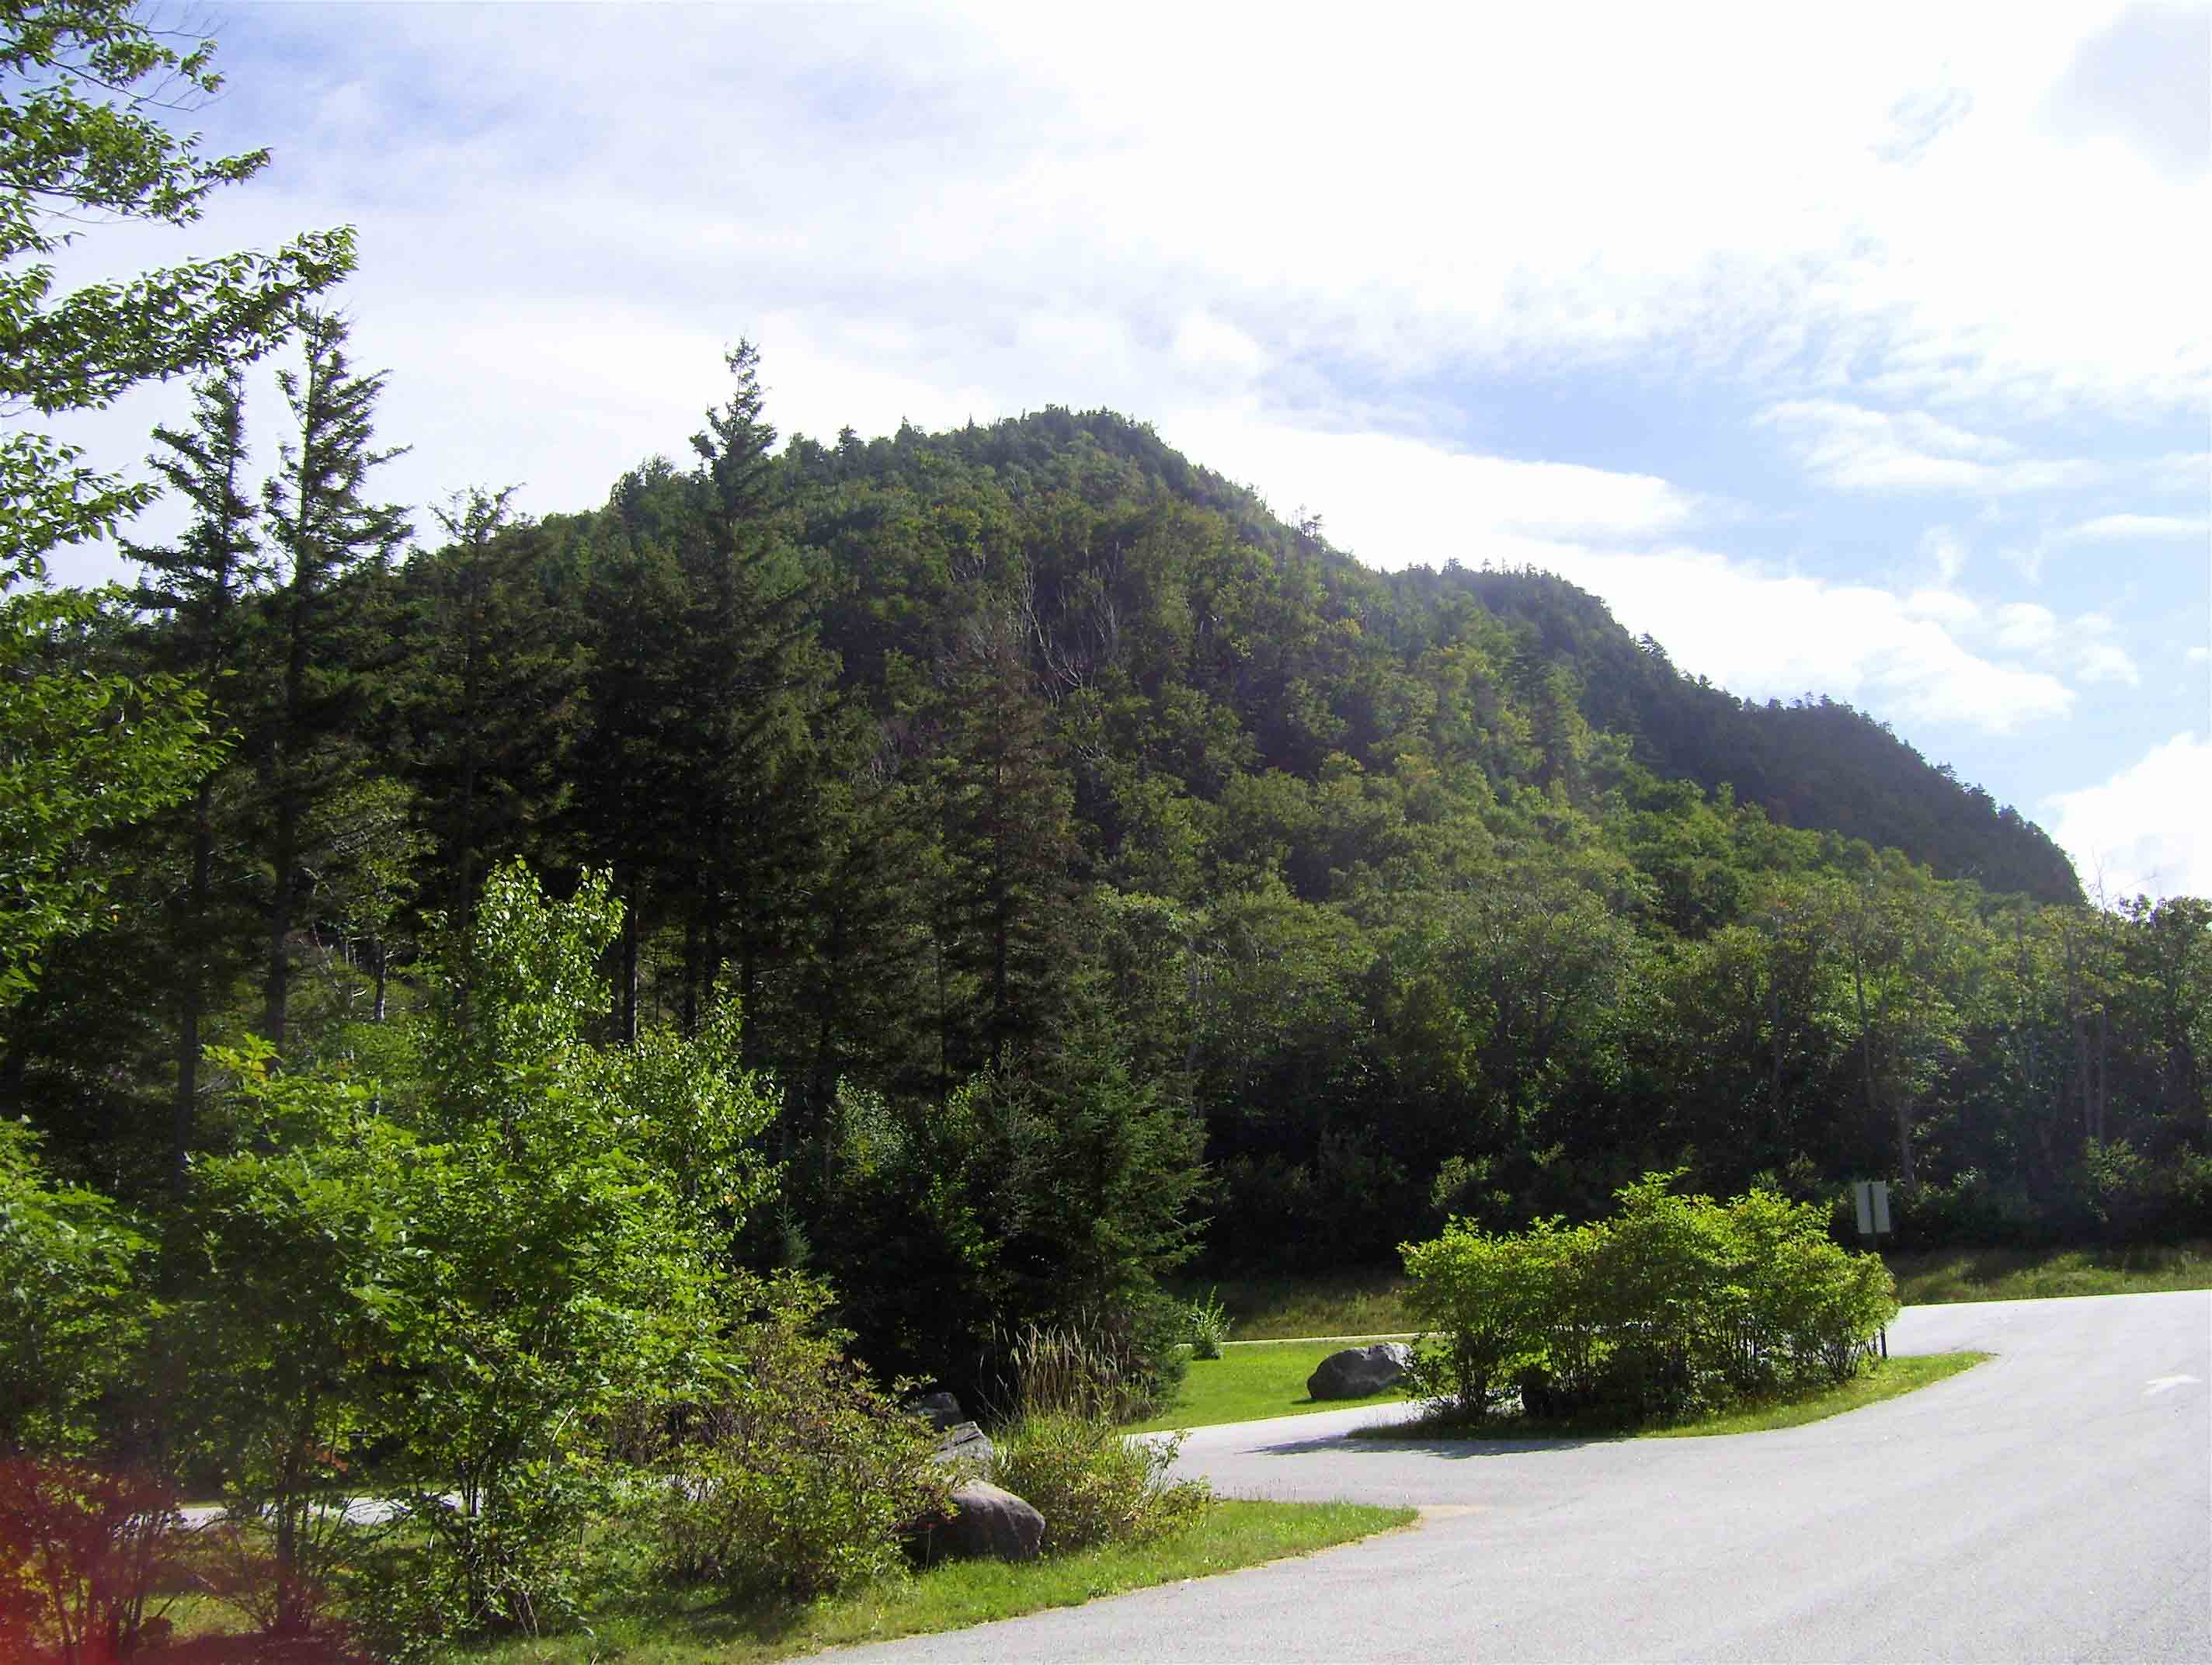 mm 16.3 View across NH 112 in Kinsman Notch to beginning of the Kinsman Ridge. From here the northbound trail follows this ridge for several miles.  Courtesy dlcul@conncoll.edu